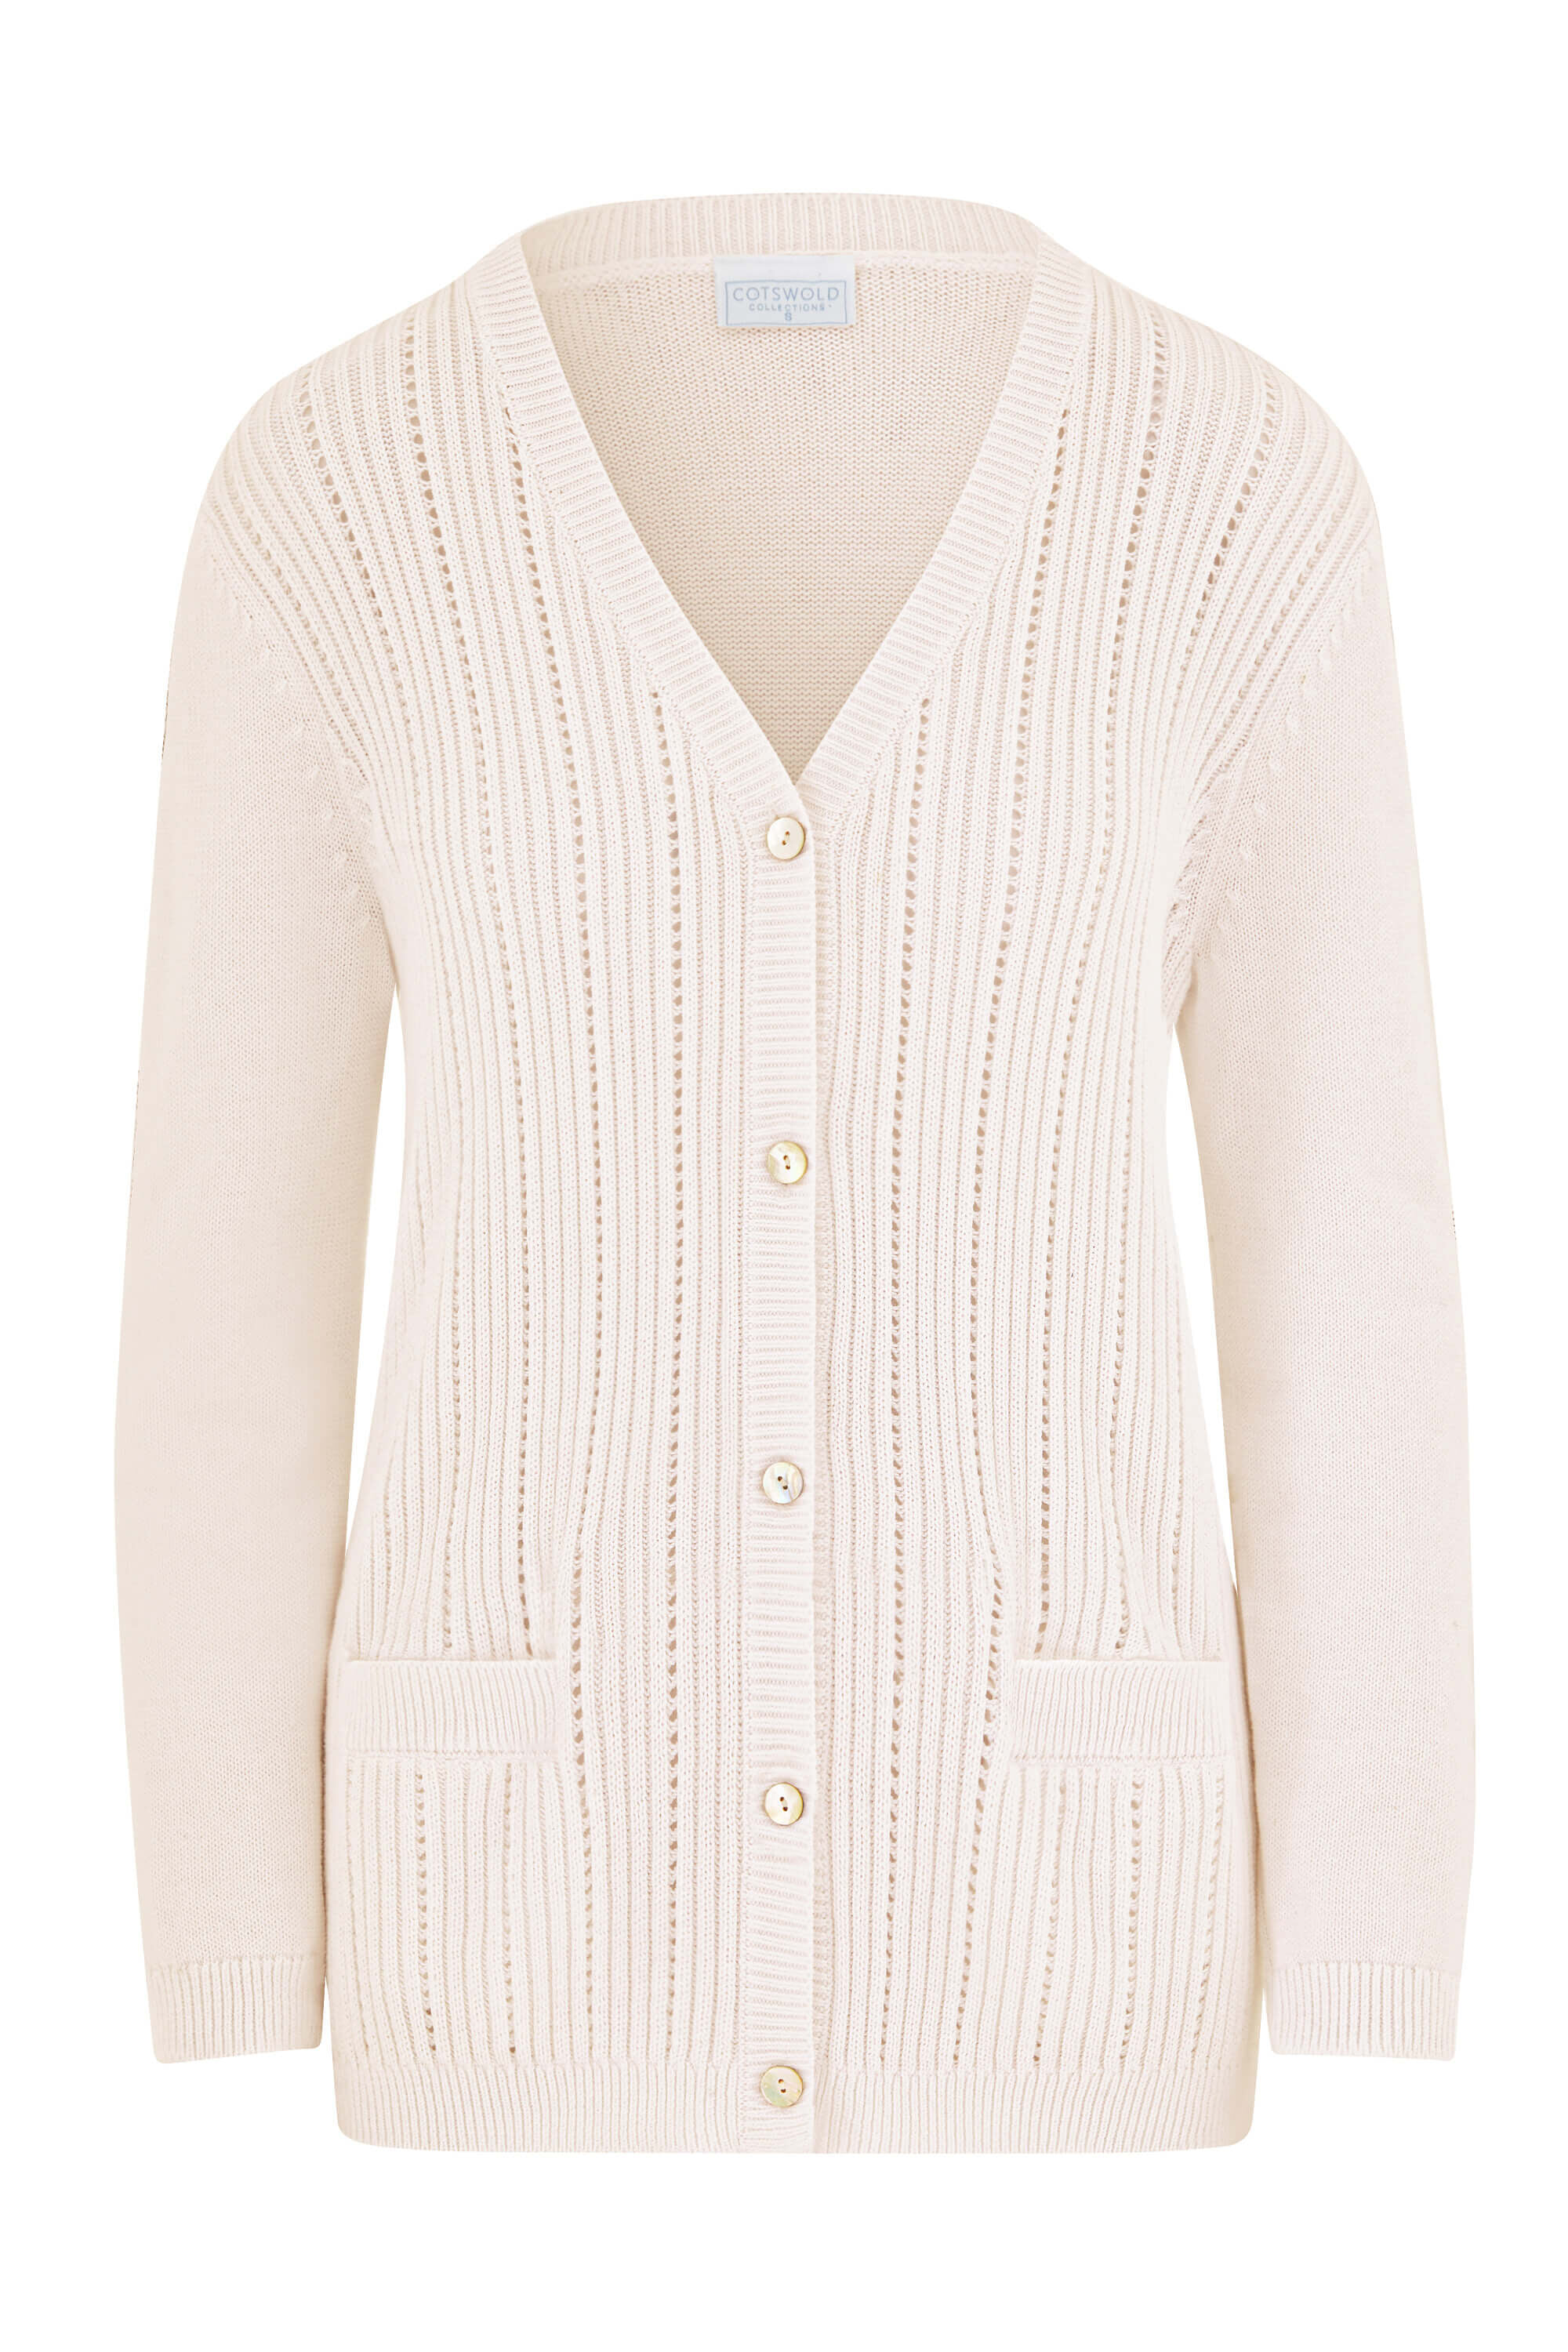 Classic Knitwear | Sweaters | Cardigans | Cotswold Collections